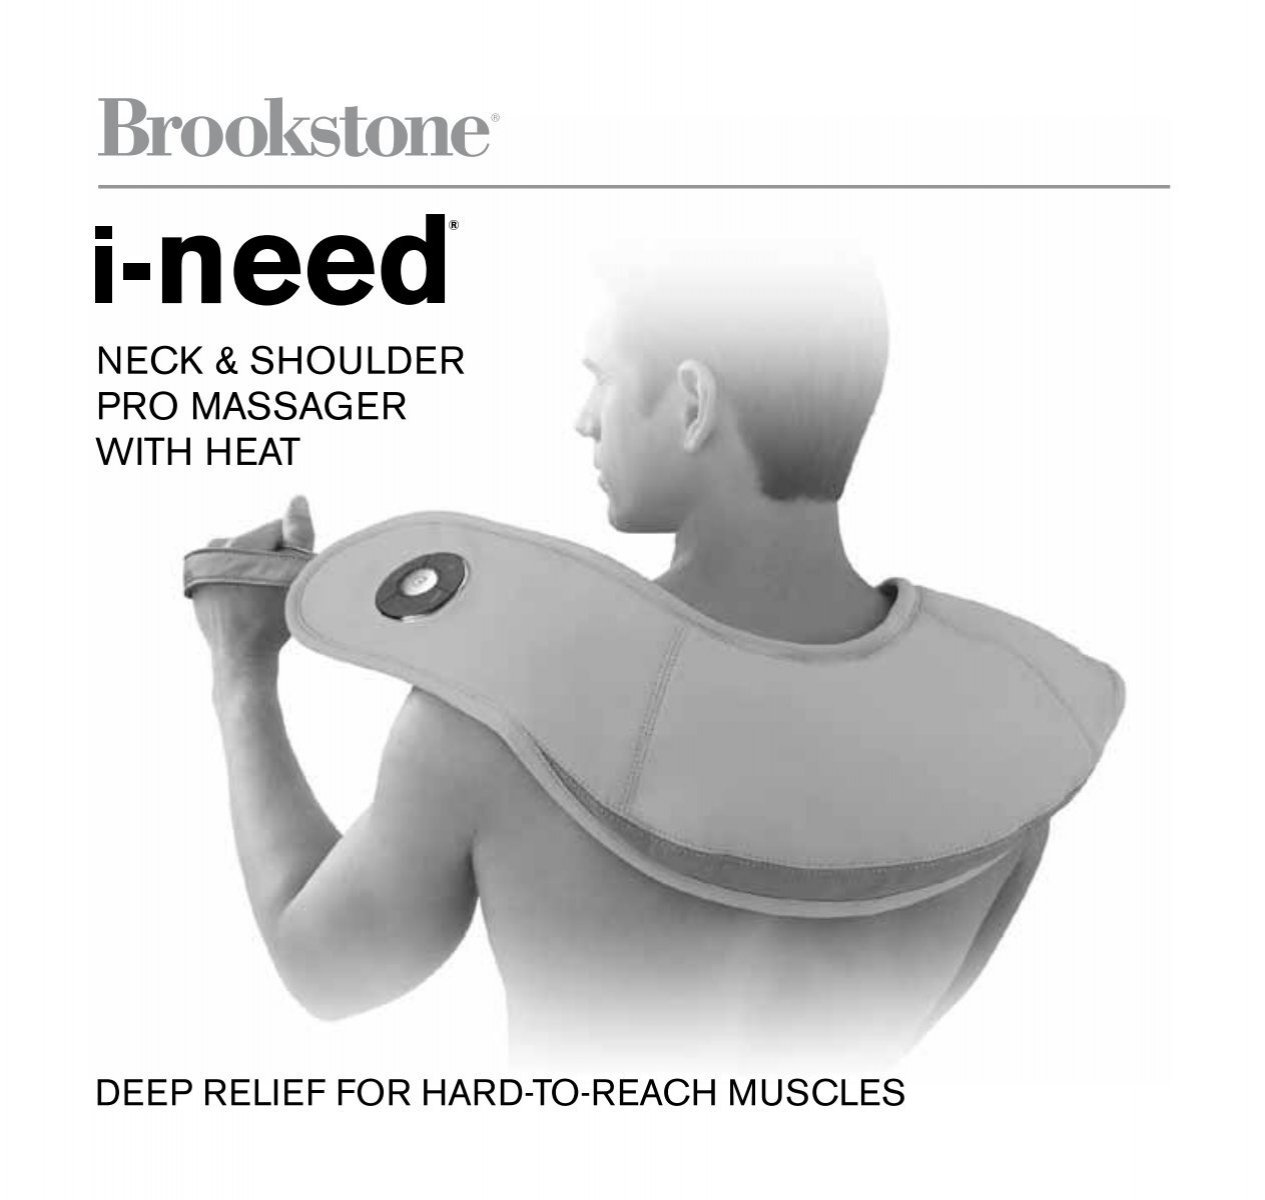 Brookstone Heated Neck and Shoulder Massager